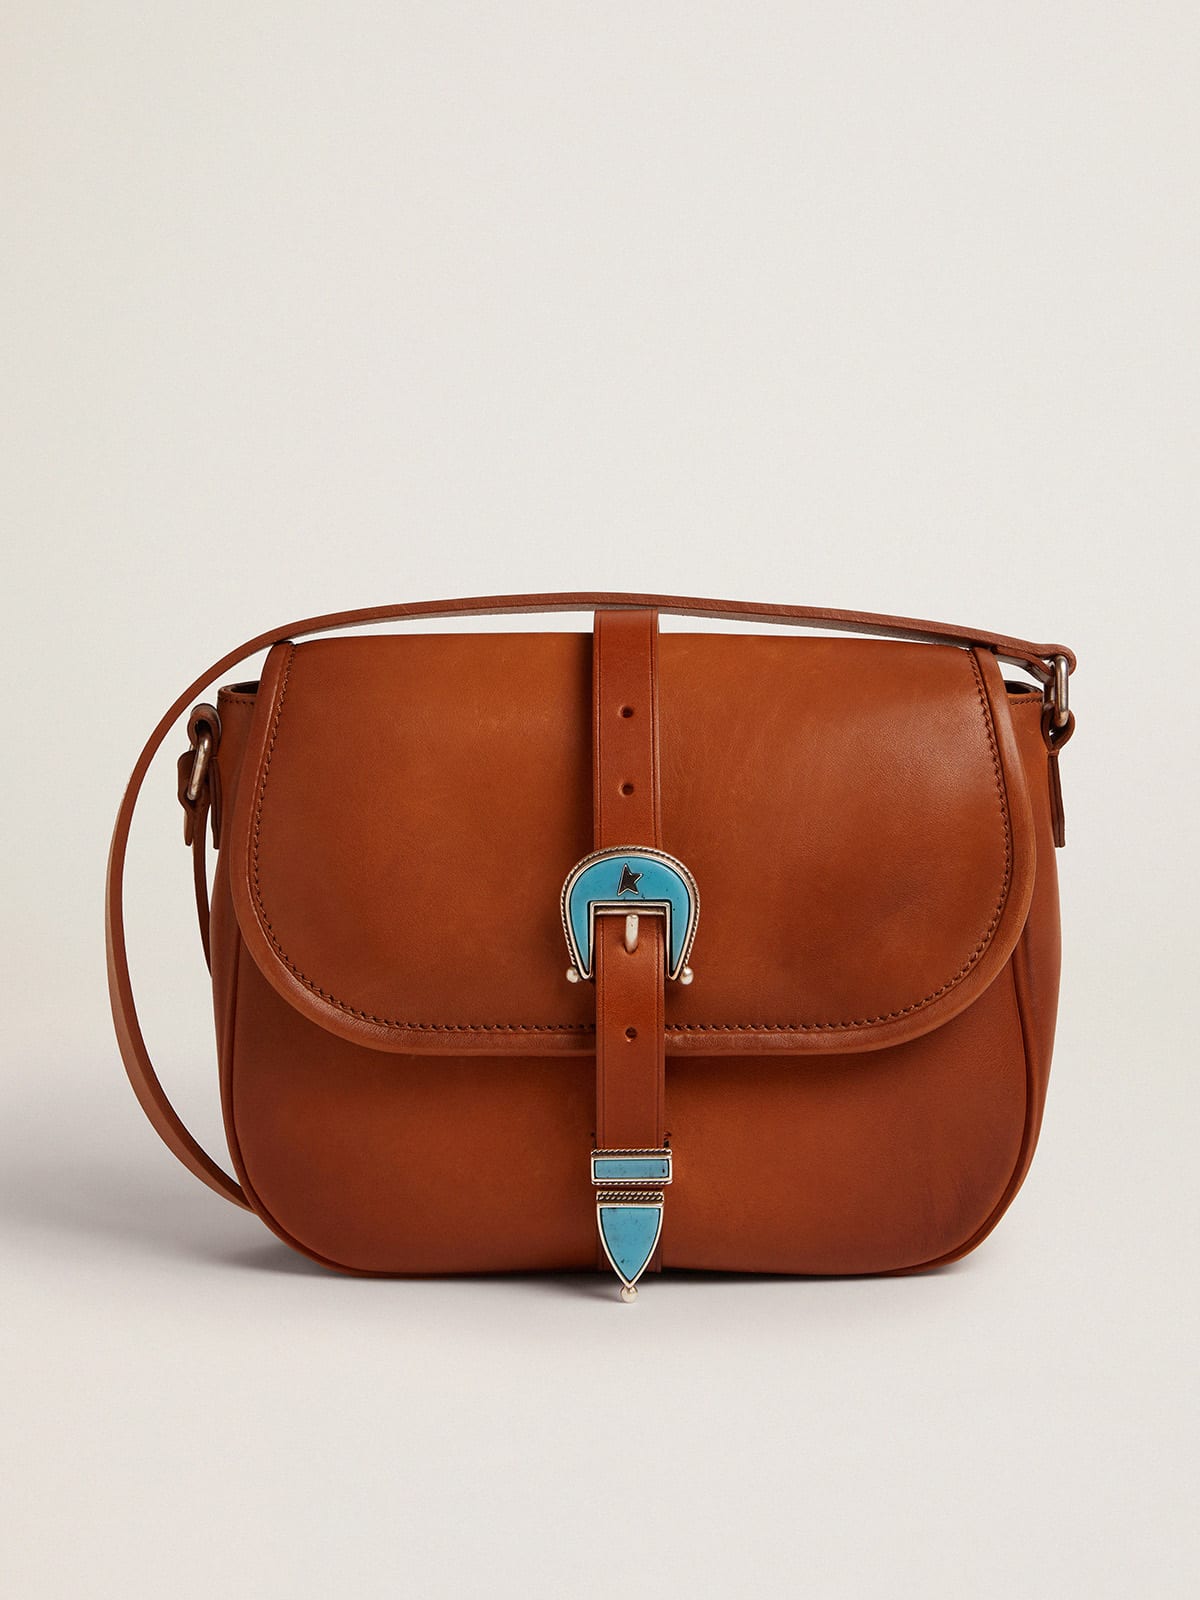 Golden Goose - Medium Rodeo Bag in tan-colored leather with light blue details in 